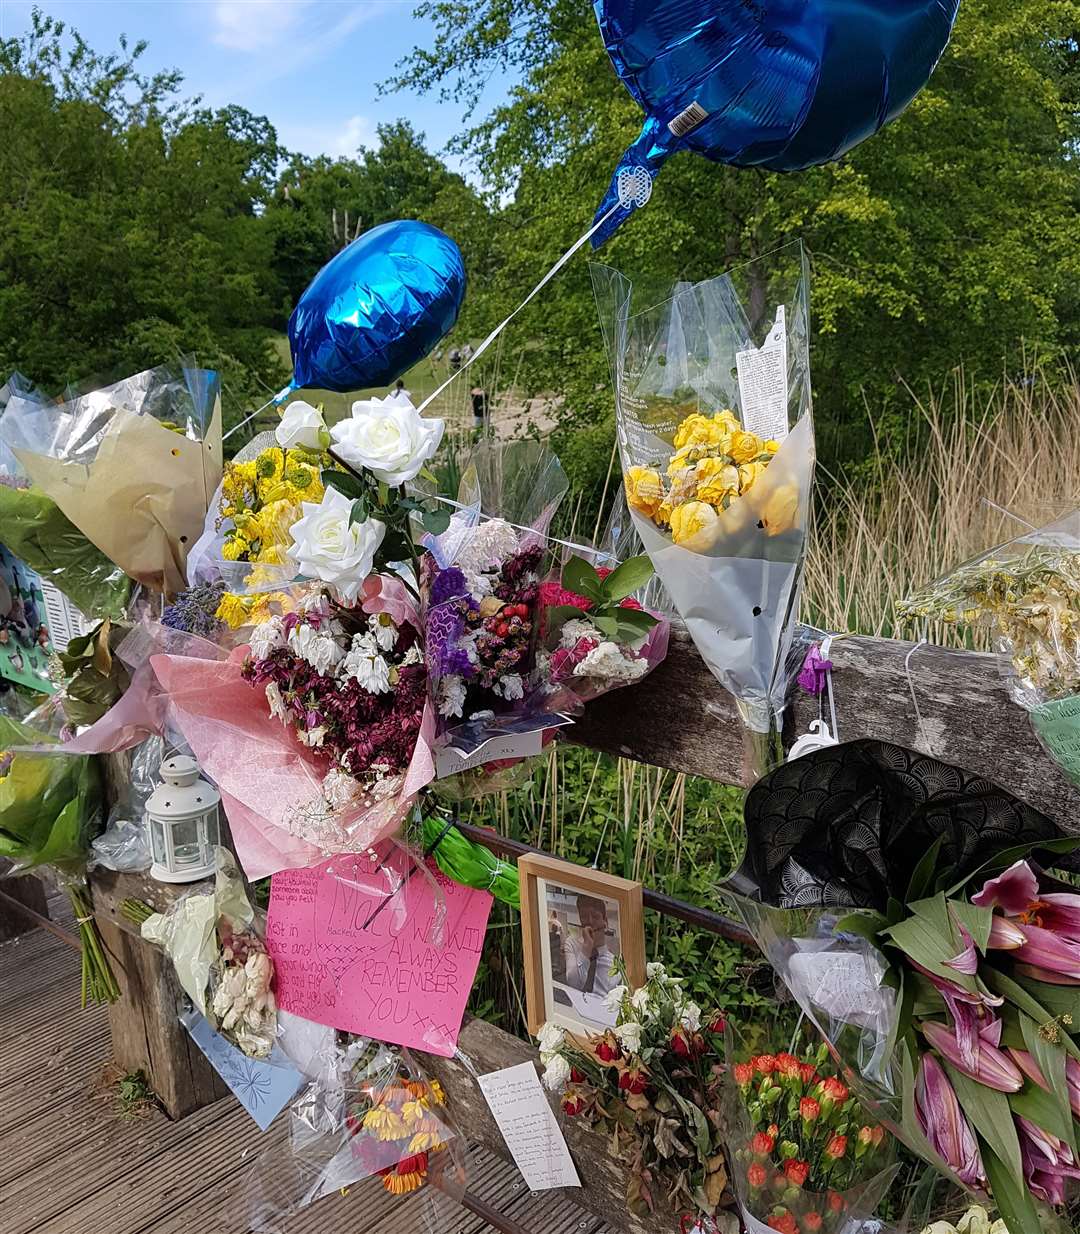 Flowers and messages were left at Dunorlan Park in memory of Matthew